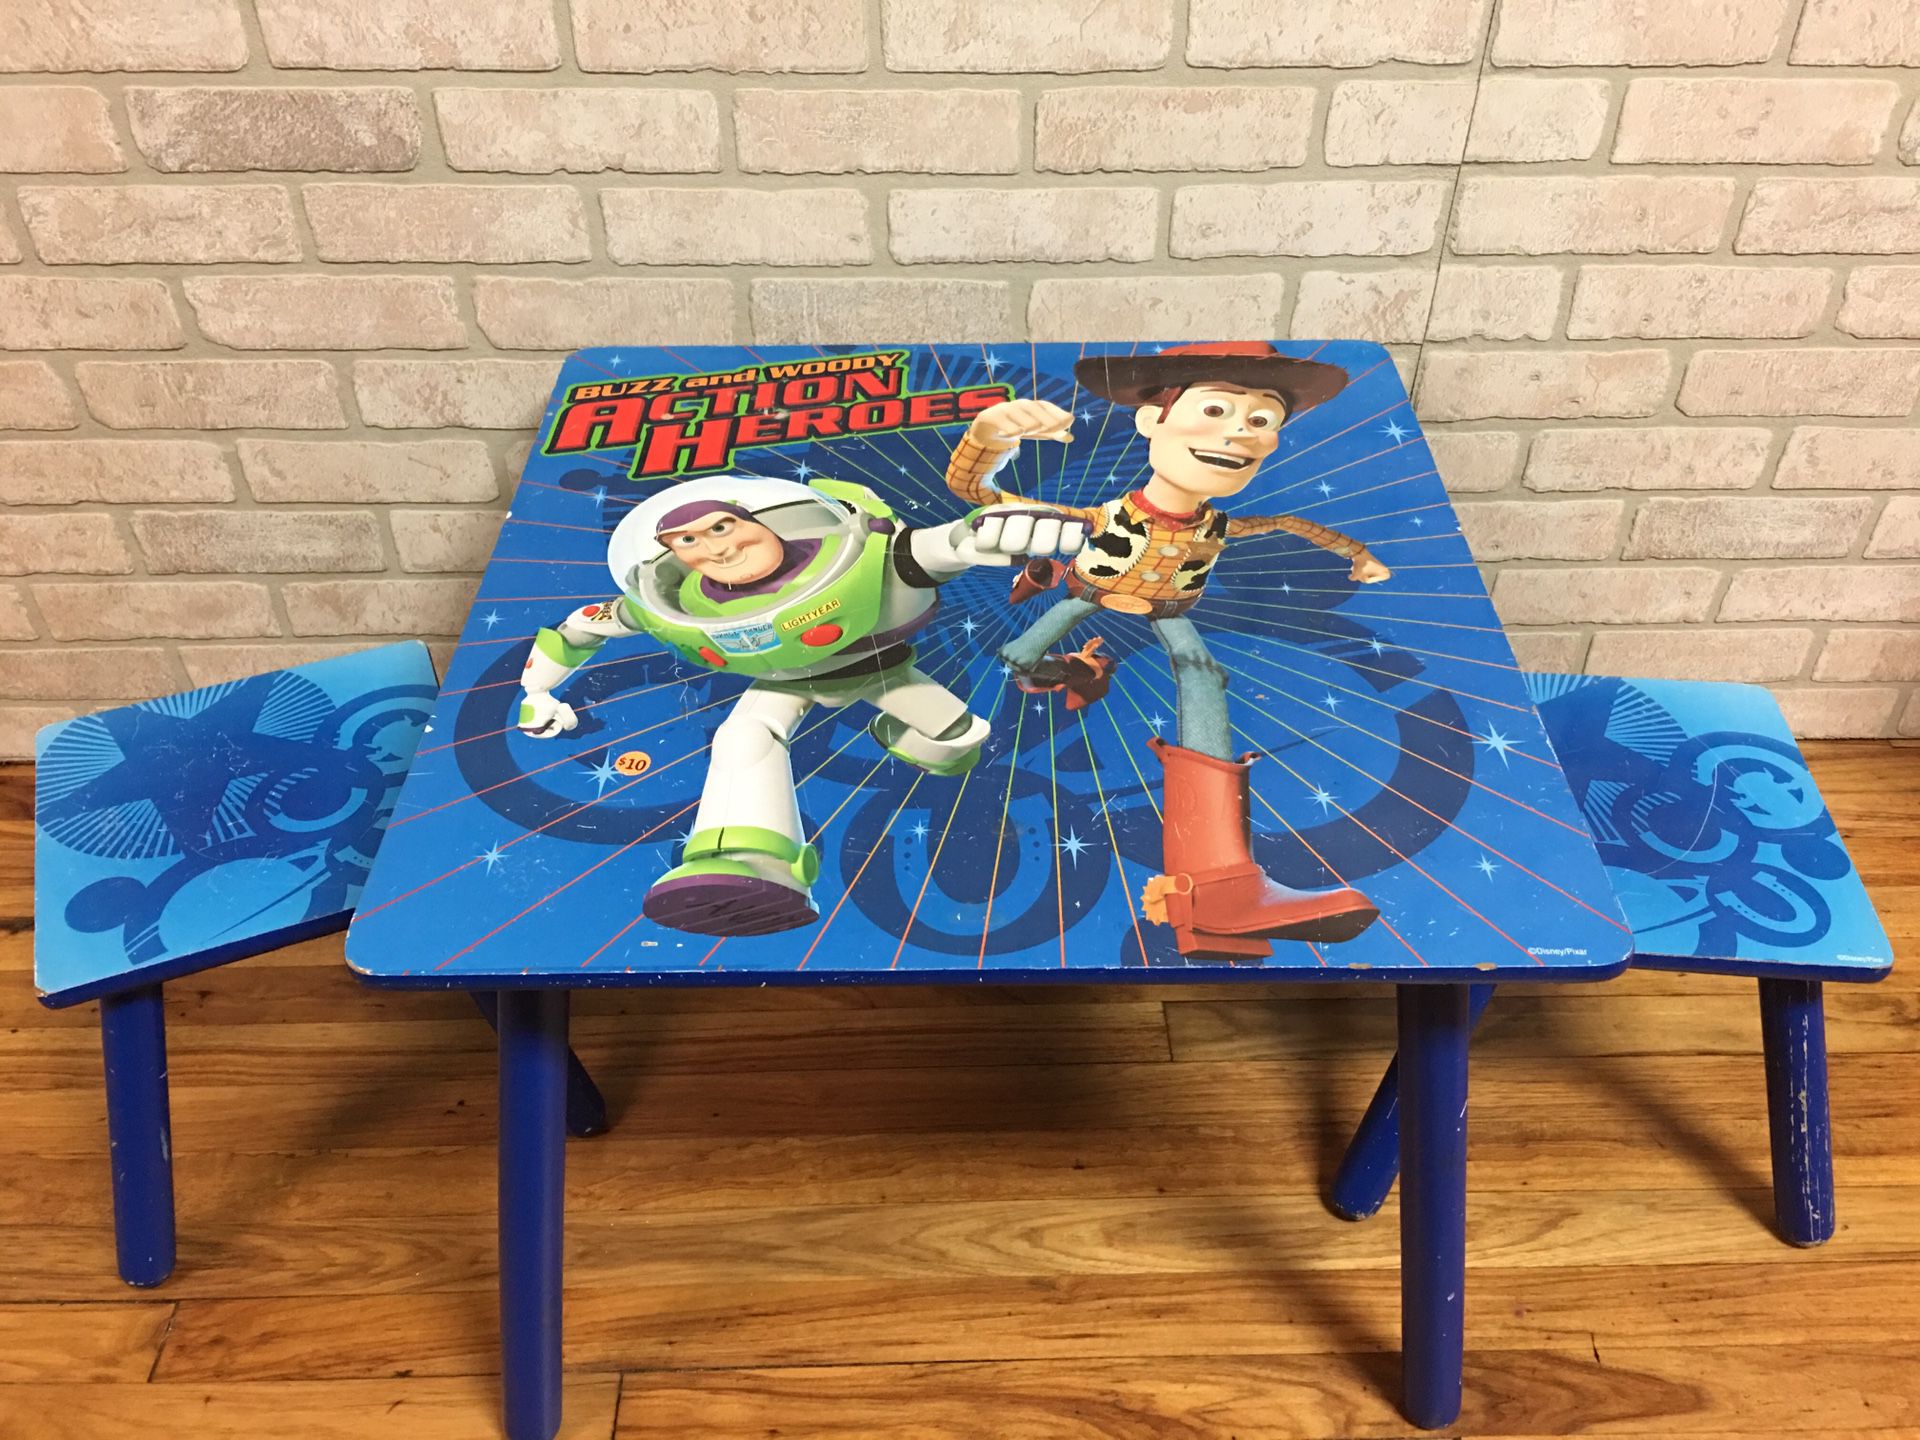 Kids toy story table set